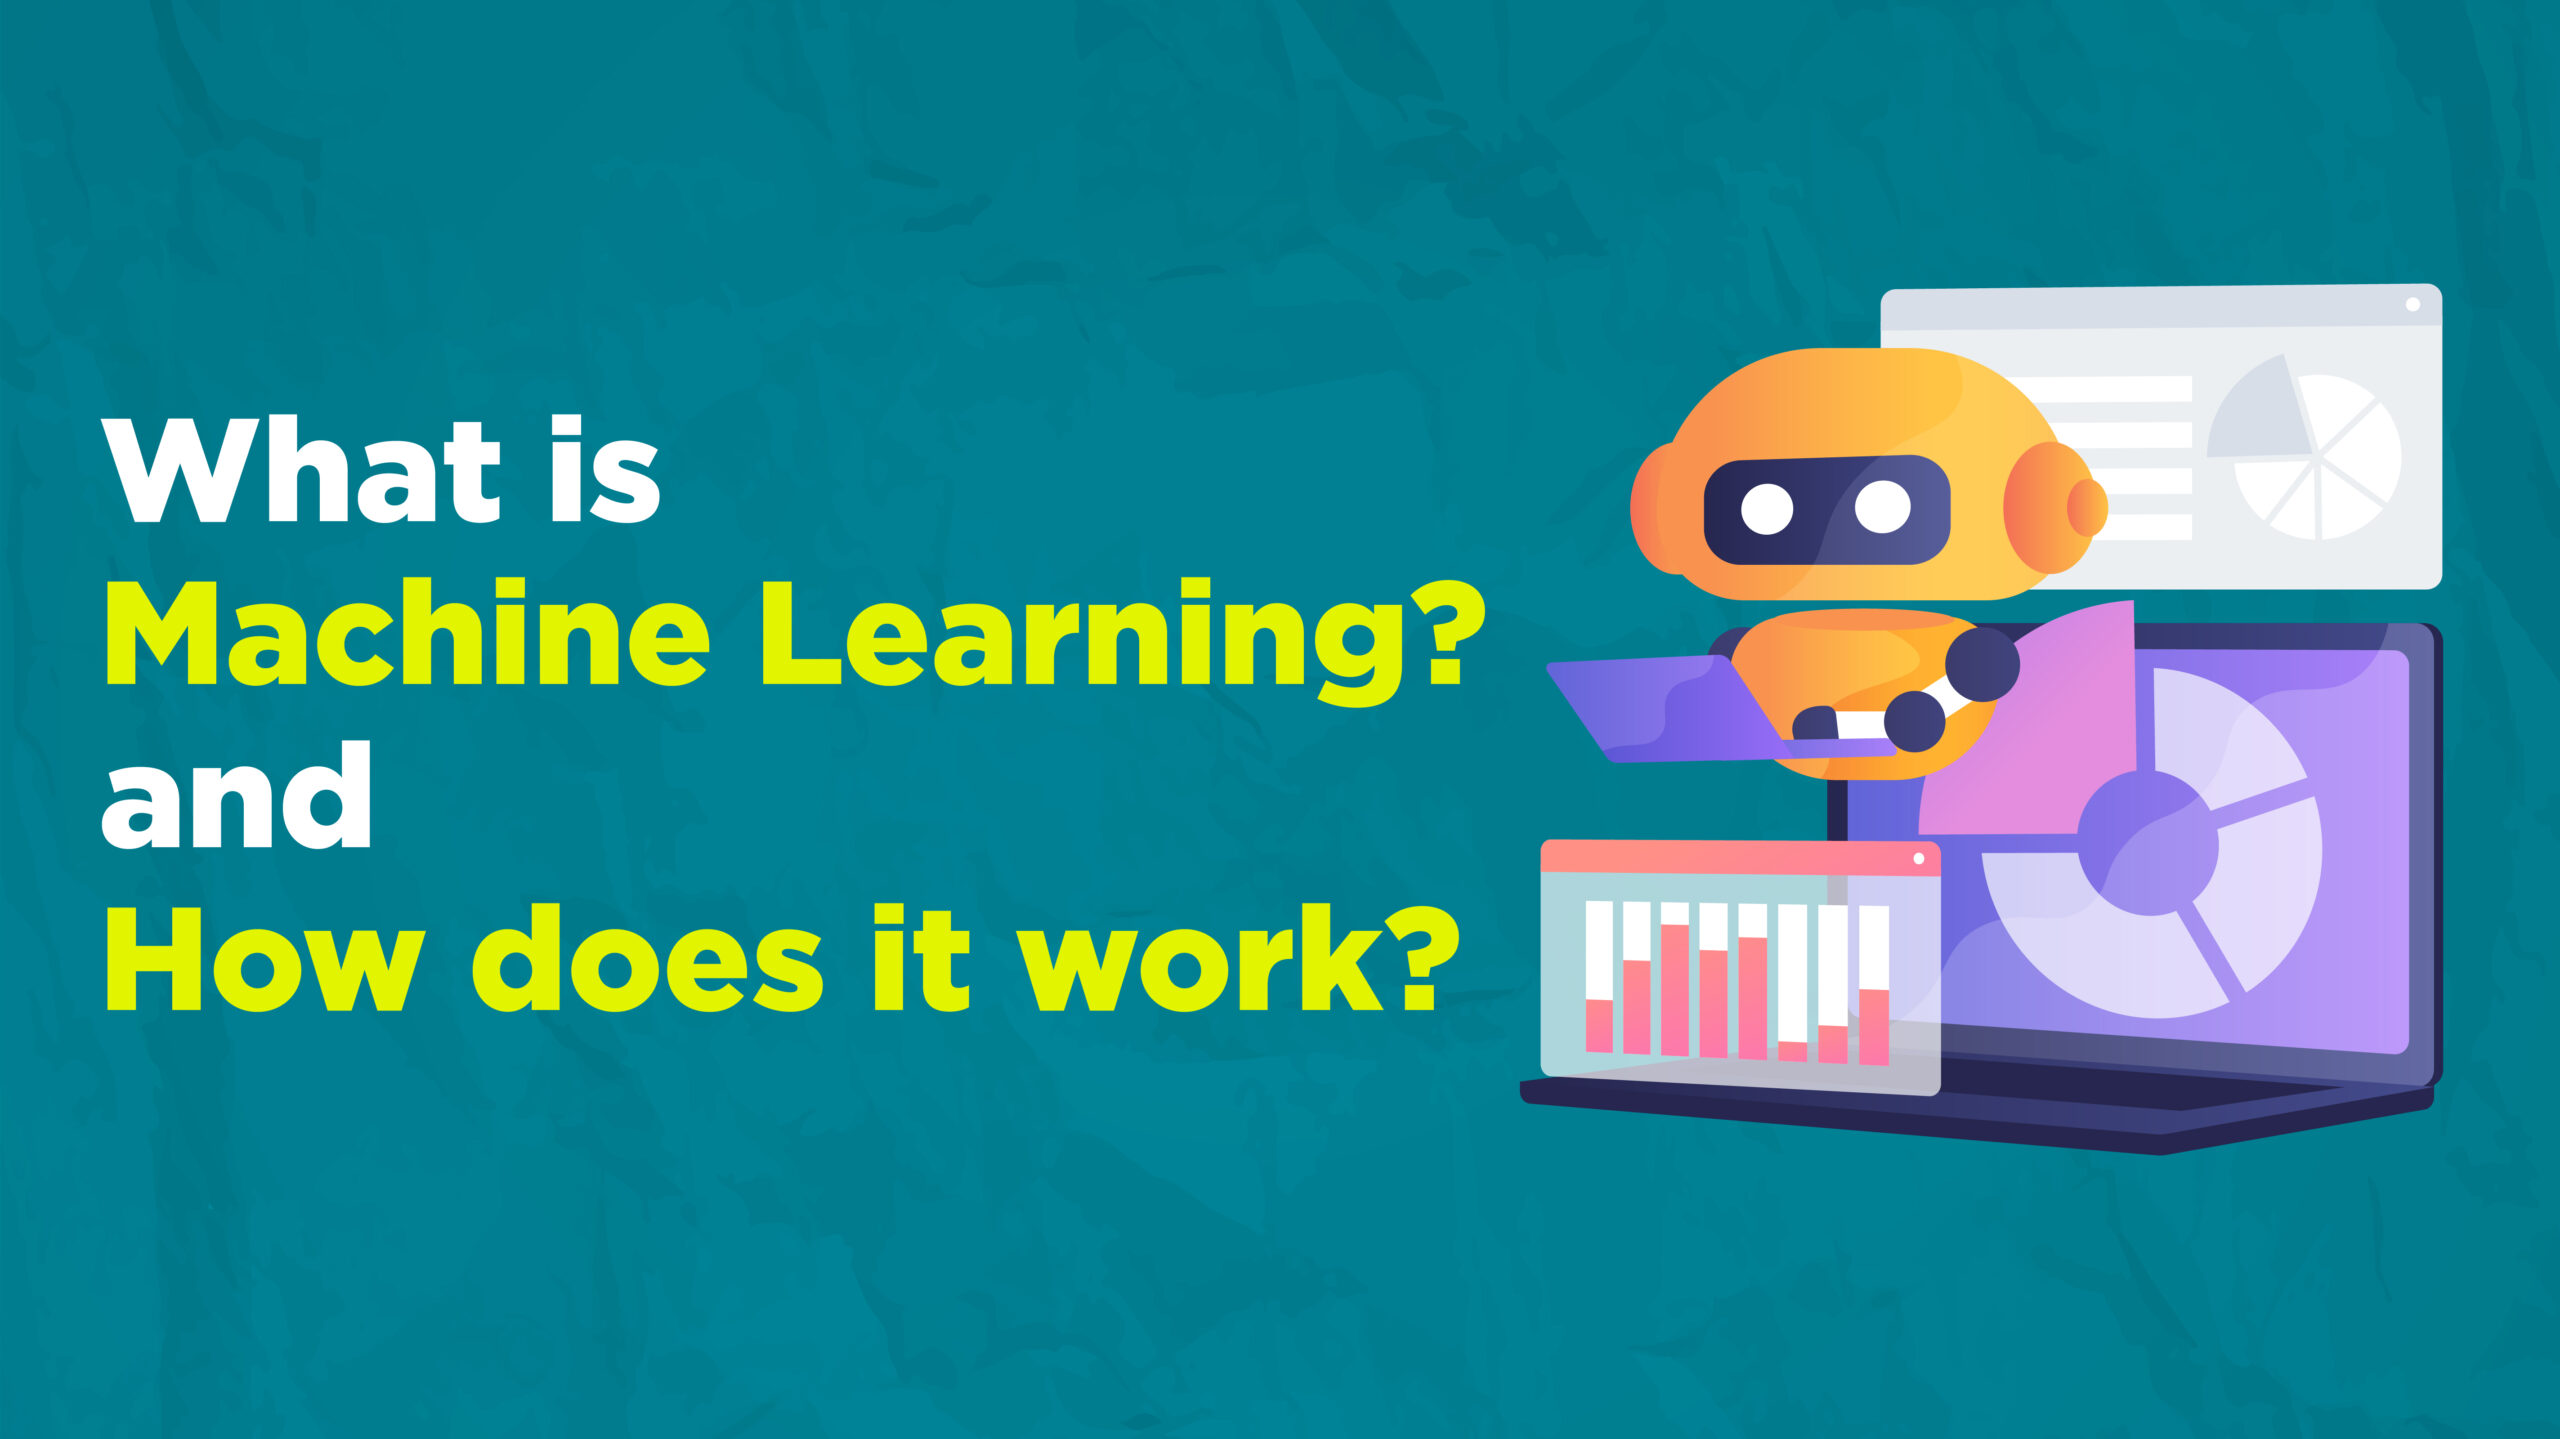 What is Machine Learning? and how does it work?